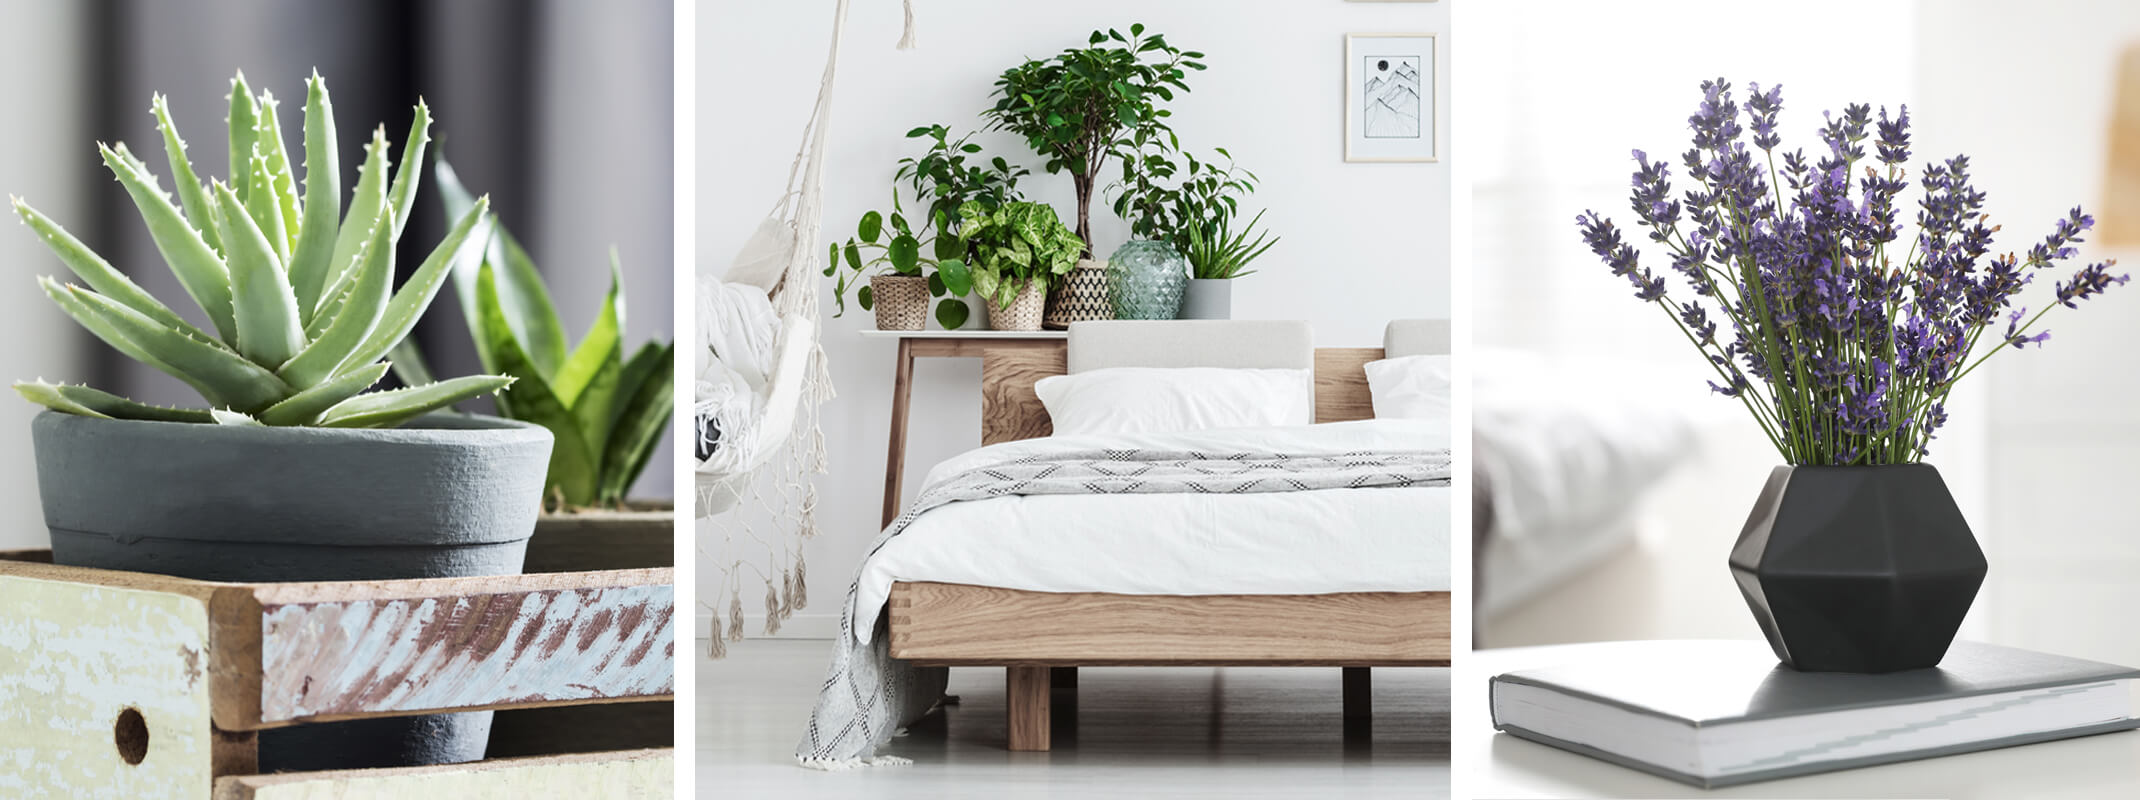 3 different images with the first showing an aloe vera plant in a gray clay pot next to a snake plant and both are in a wooden crate, the second image is a nice light airy bedroom with houseplants sitting behind the headboard and the third image is a geometrical black vase sitting on a book with fresh cut lavender inside